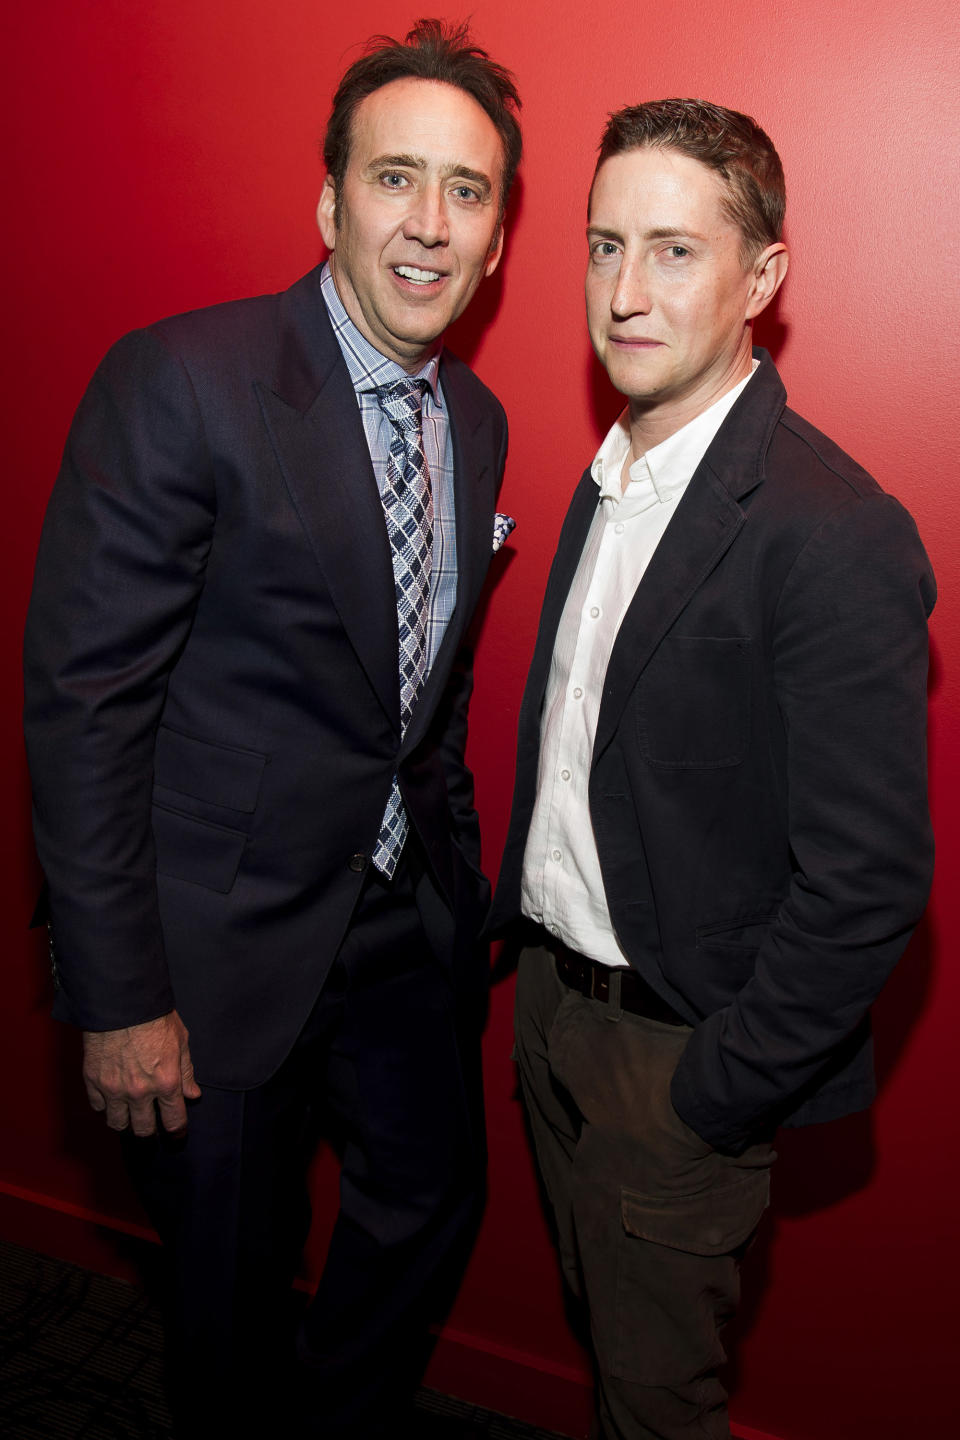 Actor Nicolas Cage, left, and director David Gordon Green pose for a portrait in promotion of their upcoming film "Joe" on Wednesday, April 9, 2014 in New York. (Photo by Charles Sykes/Invision/AP)